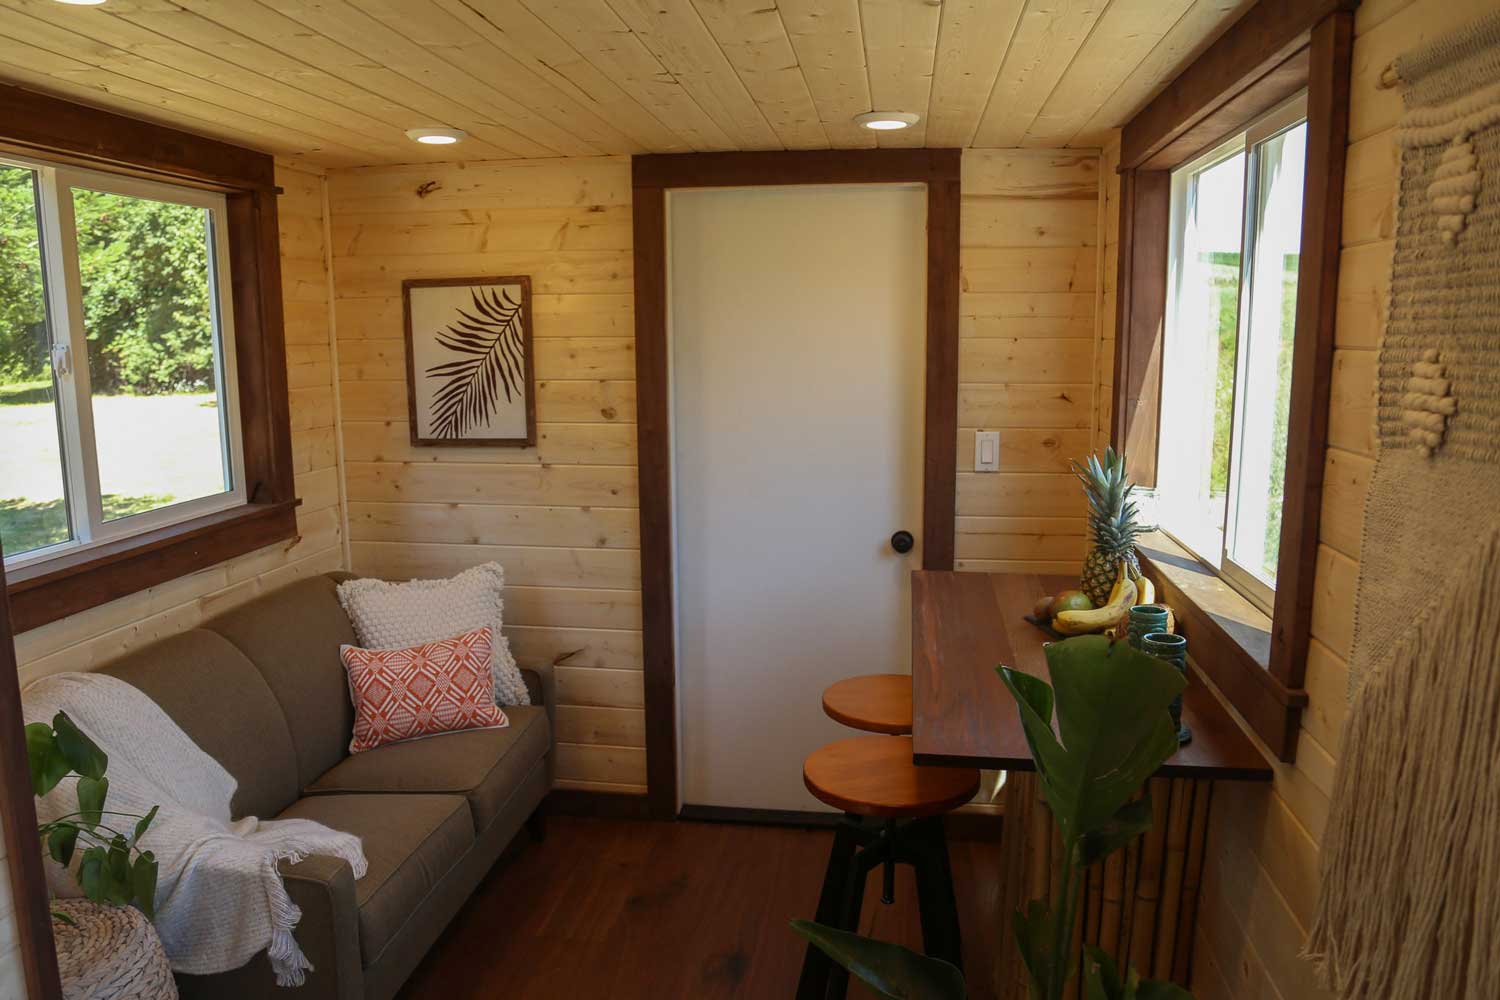 Living room in the Tropical Getaway custom tiny house